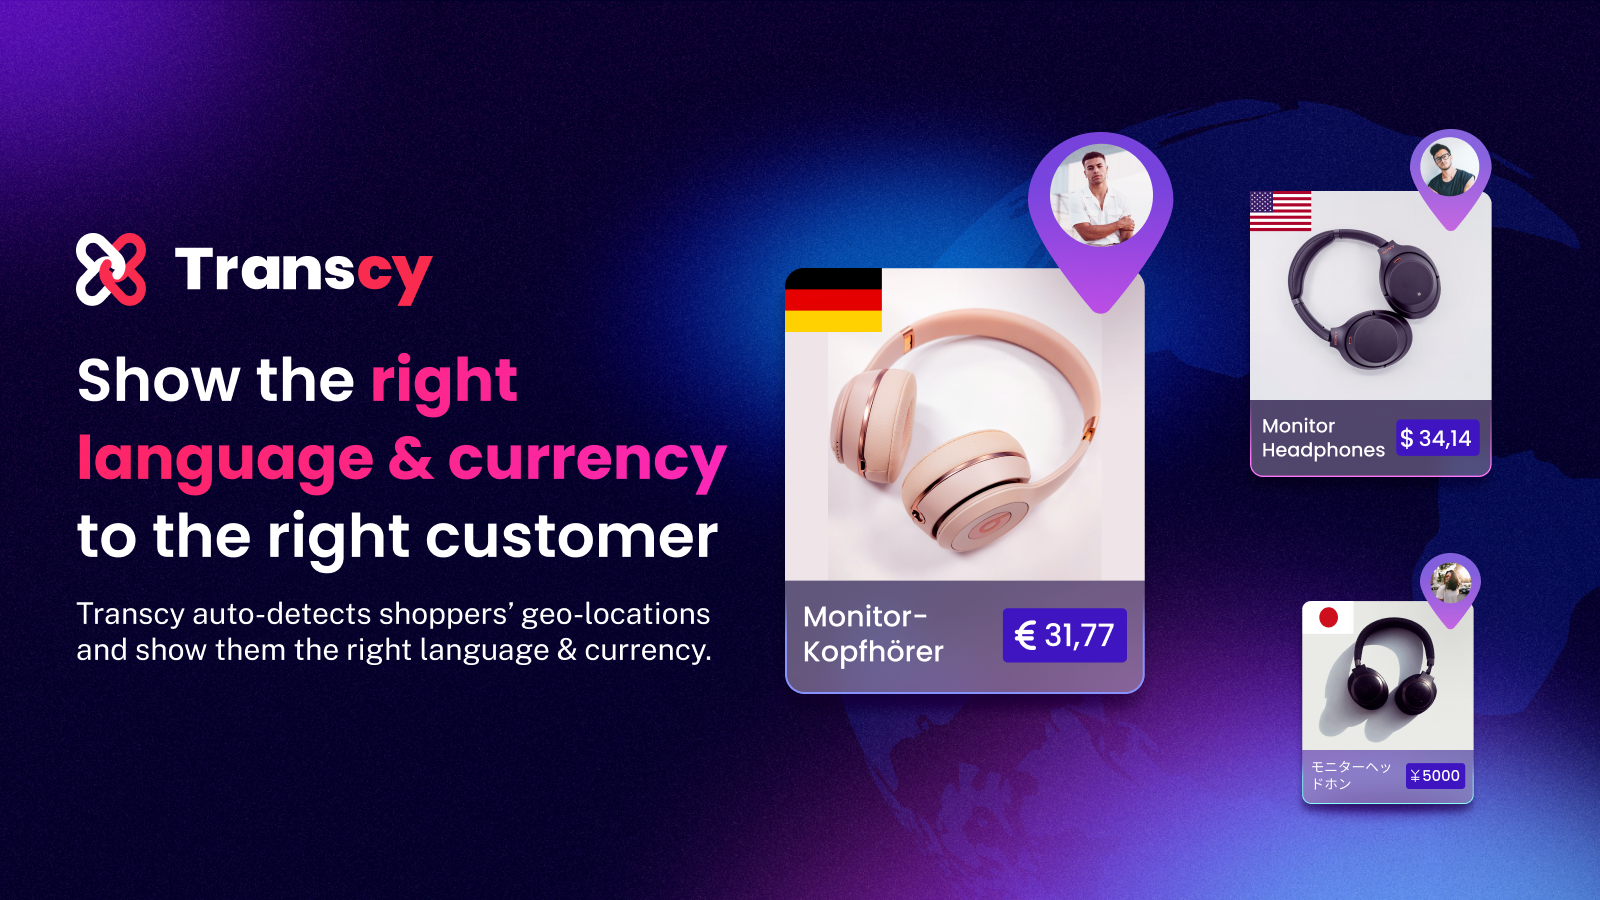 Show the right language & currency to the right customer